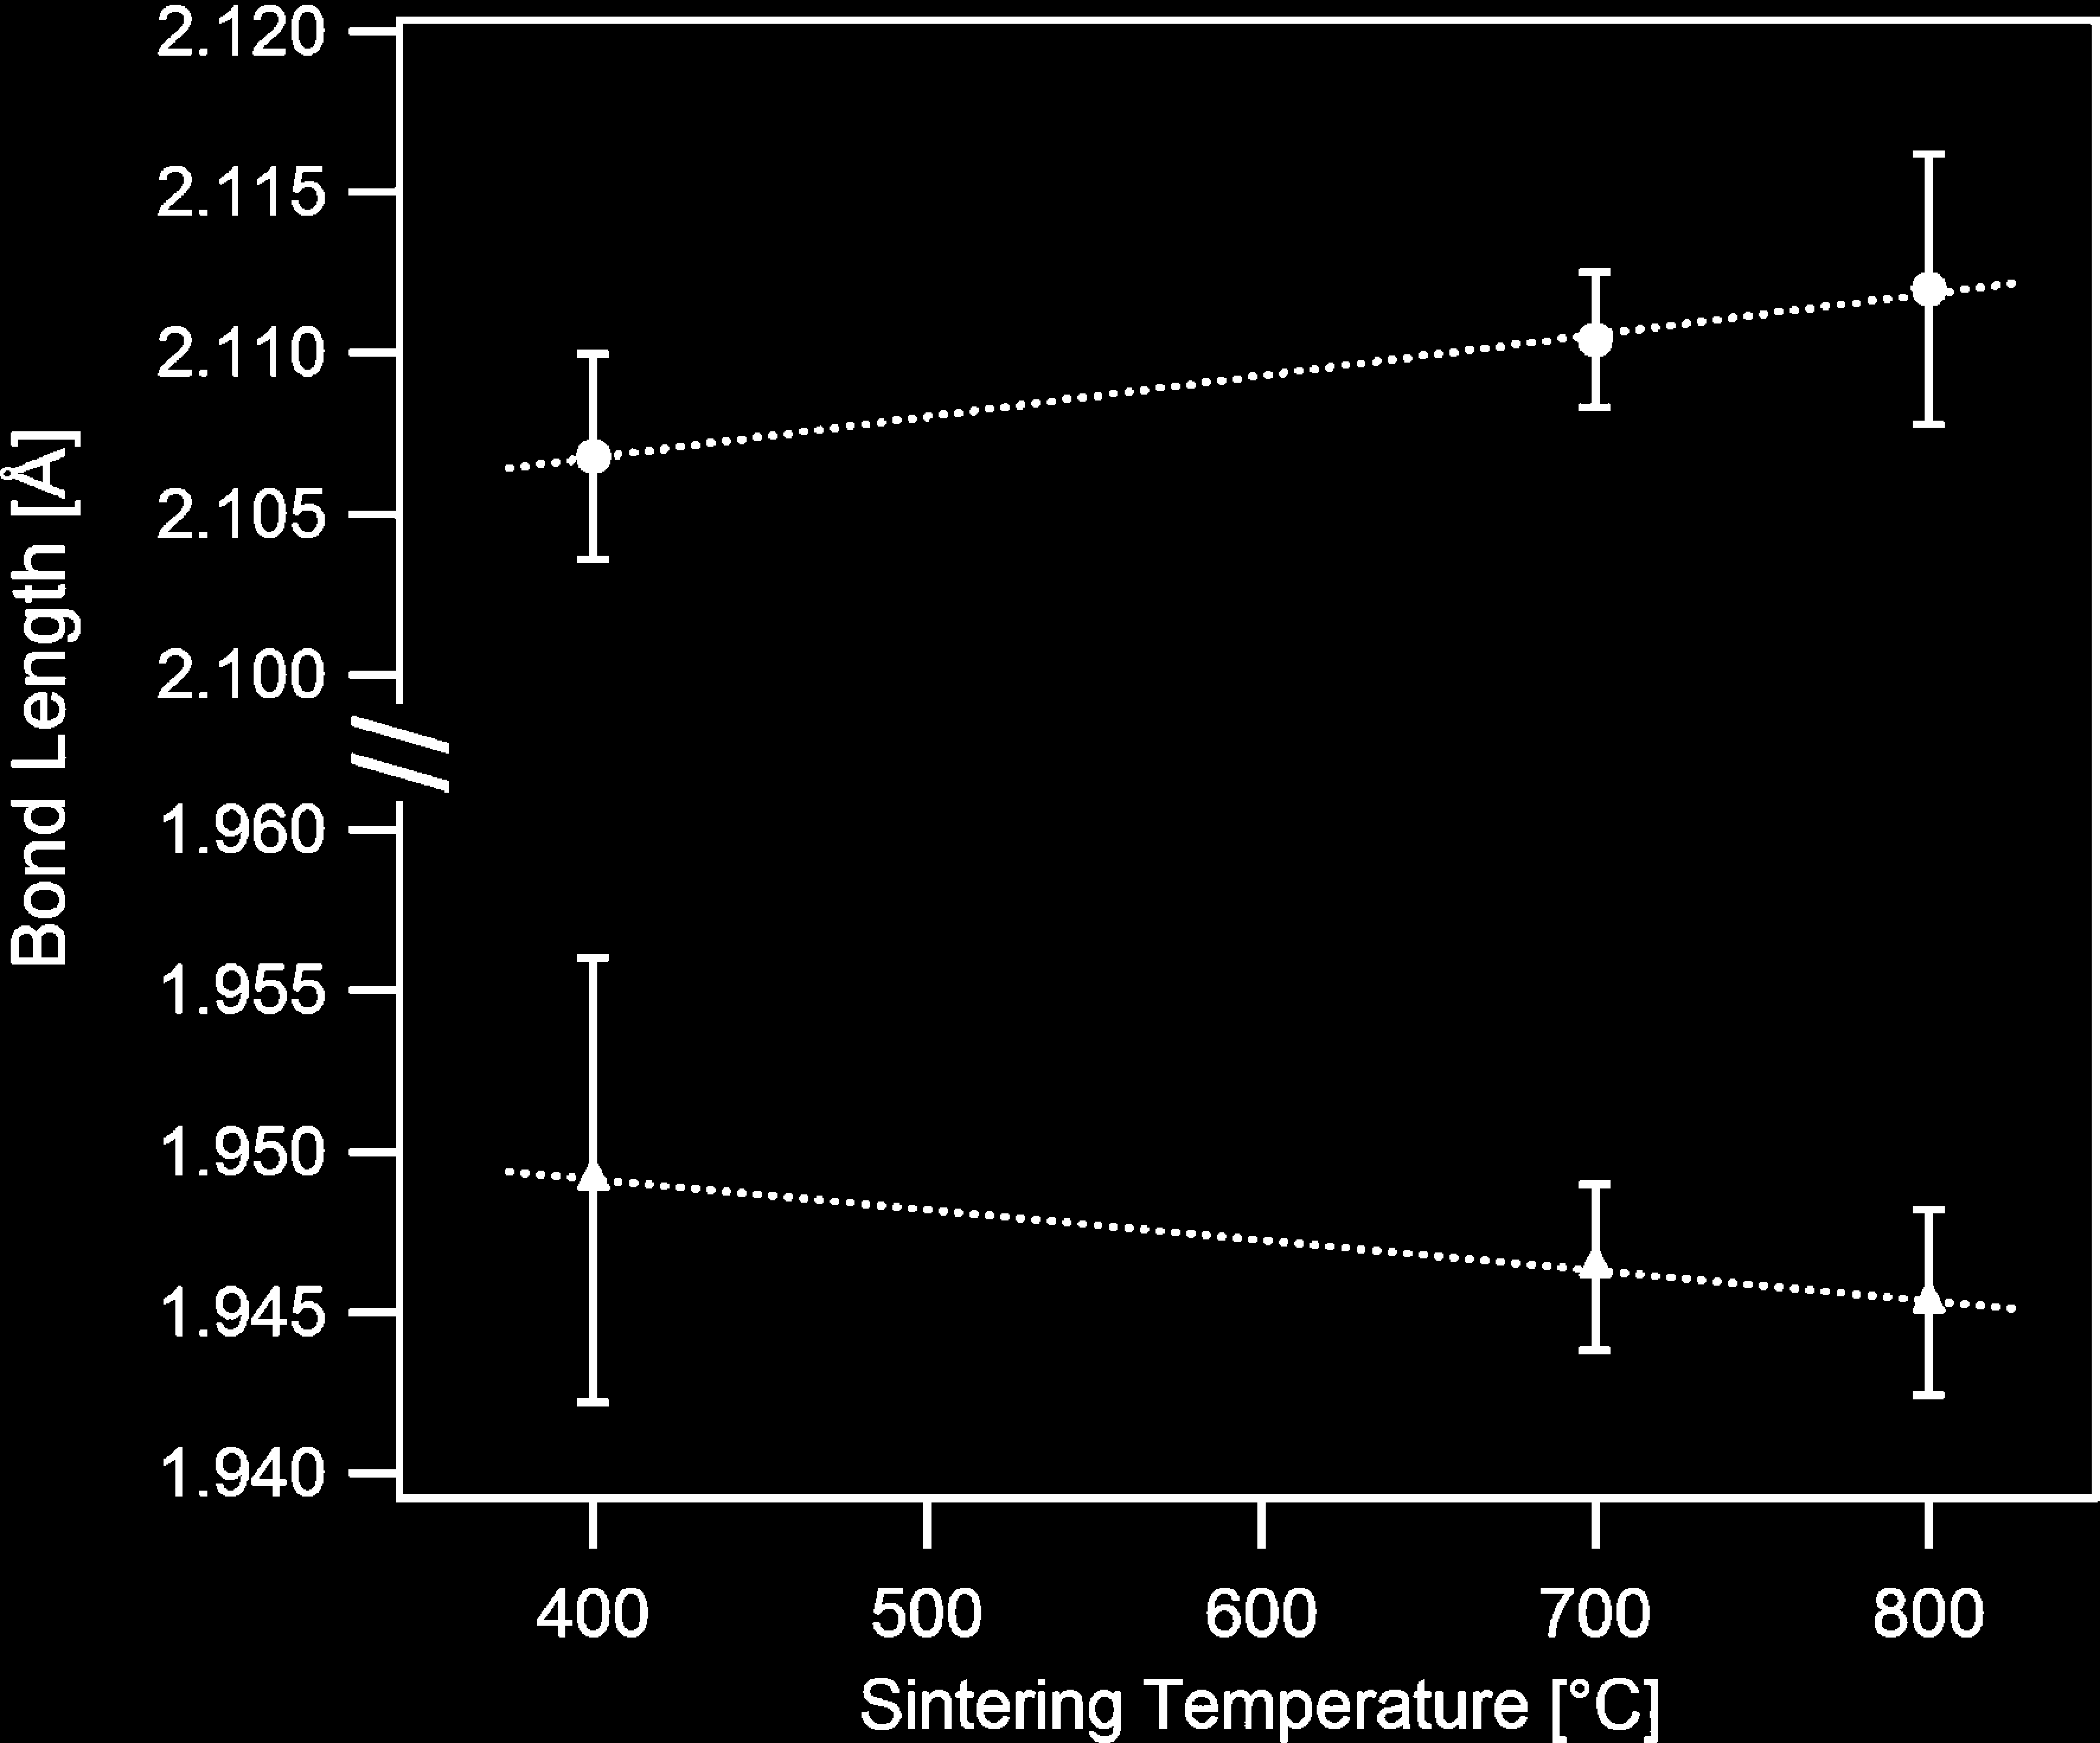 the distance between the two iron cations in the Fe 2 O 9 dimers, optimizing the Madelung energy, and by consequence lengthening further the longer Fe-O bonds while contracting the shorter bonds.